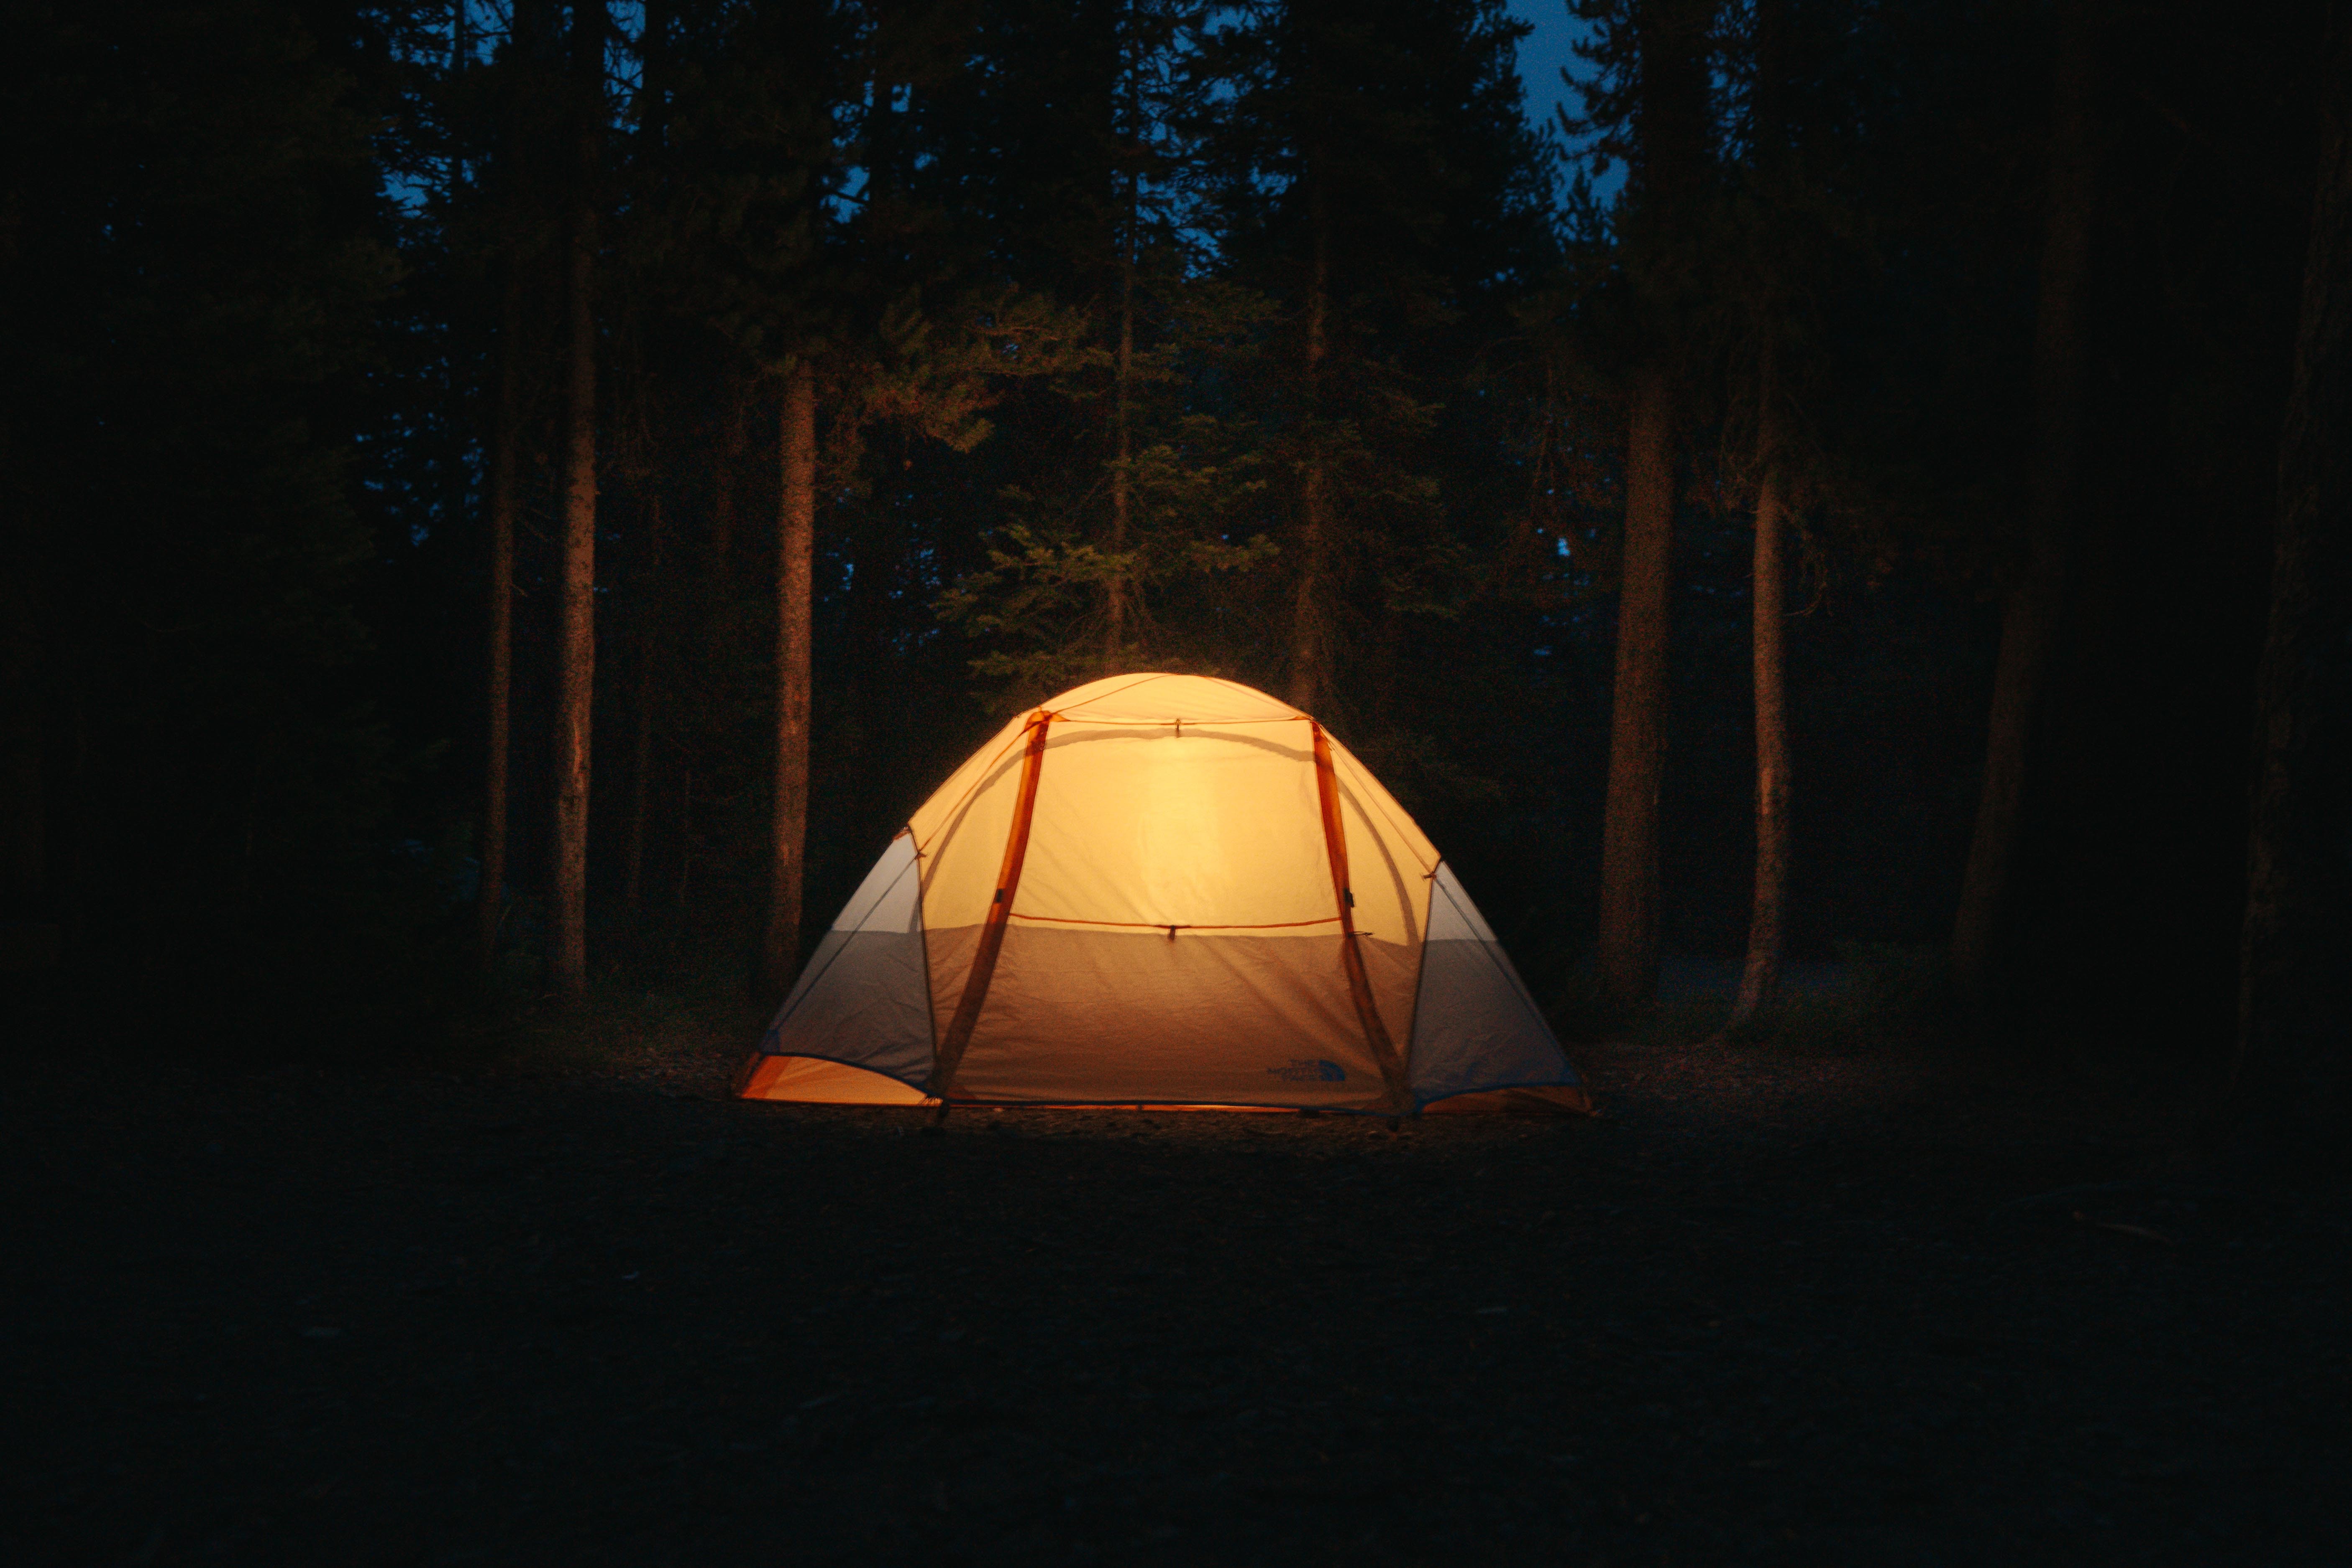 night, dark, miscellanea, miscellaneous, forest, tent, camping, campsite images